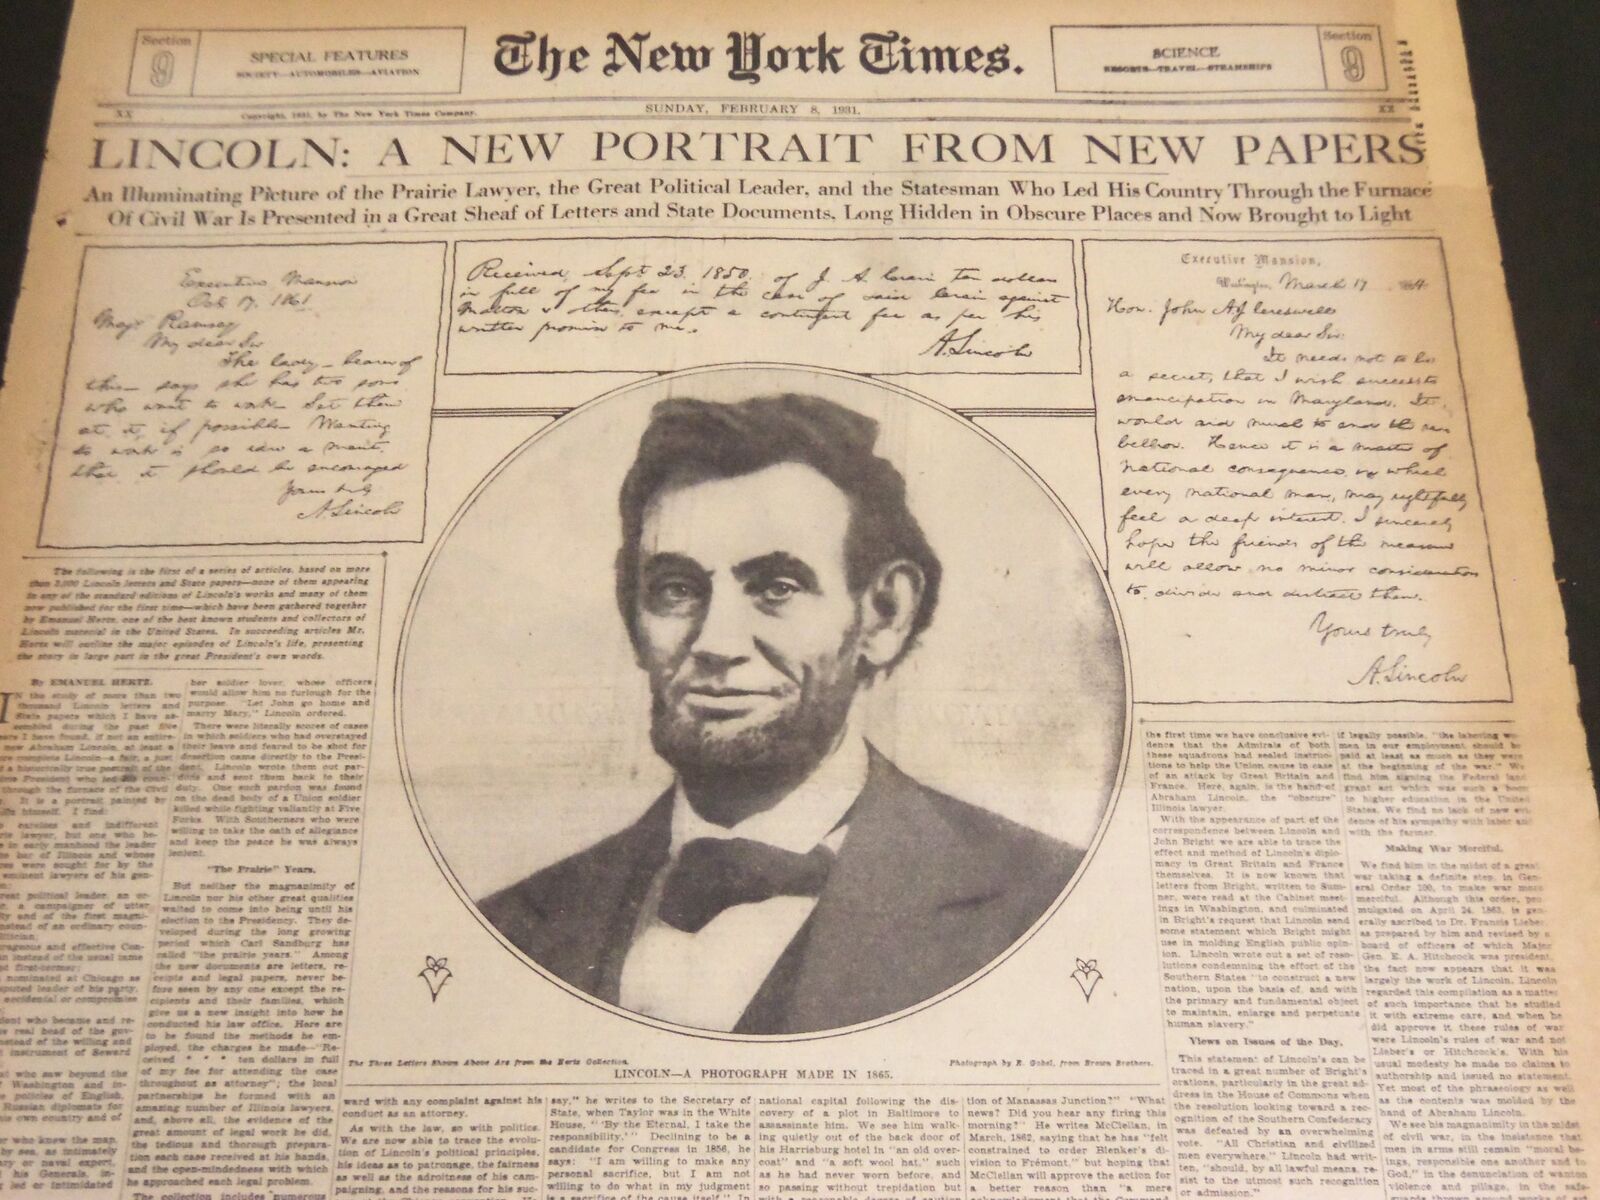 1931 FEB 8 NY TIMES SPECIAL FEATURES - LINCOLN NEW PORTRAIT NEW PAPERS - NT 7095